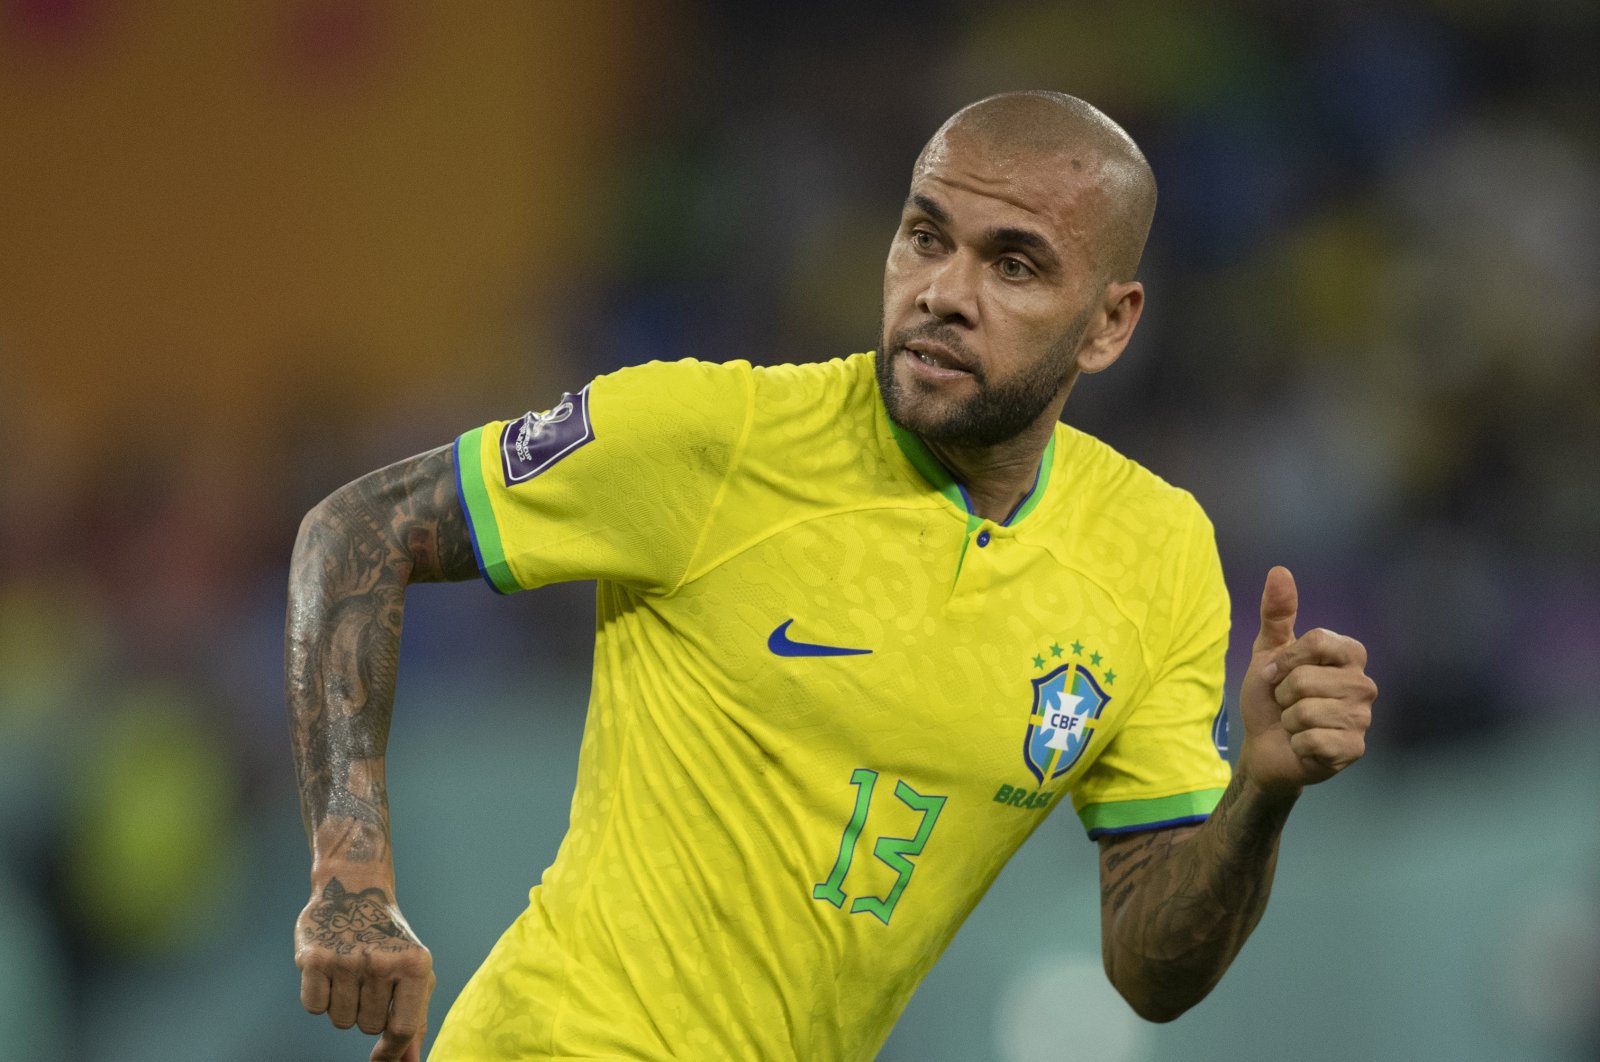 Brazil’s Dani Alves to face trial in Spain on sexual assault charge